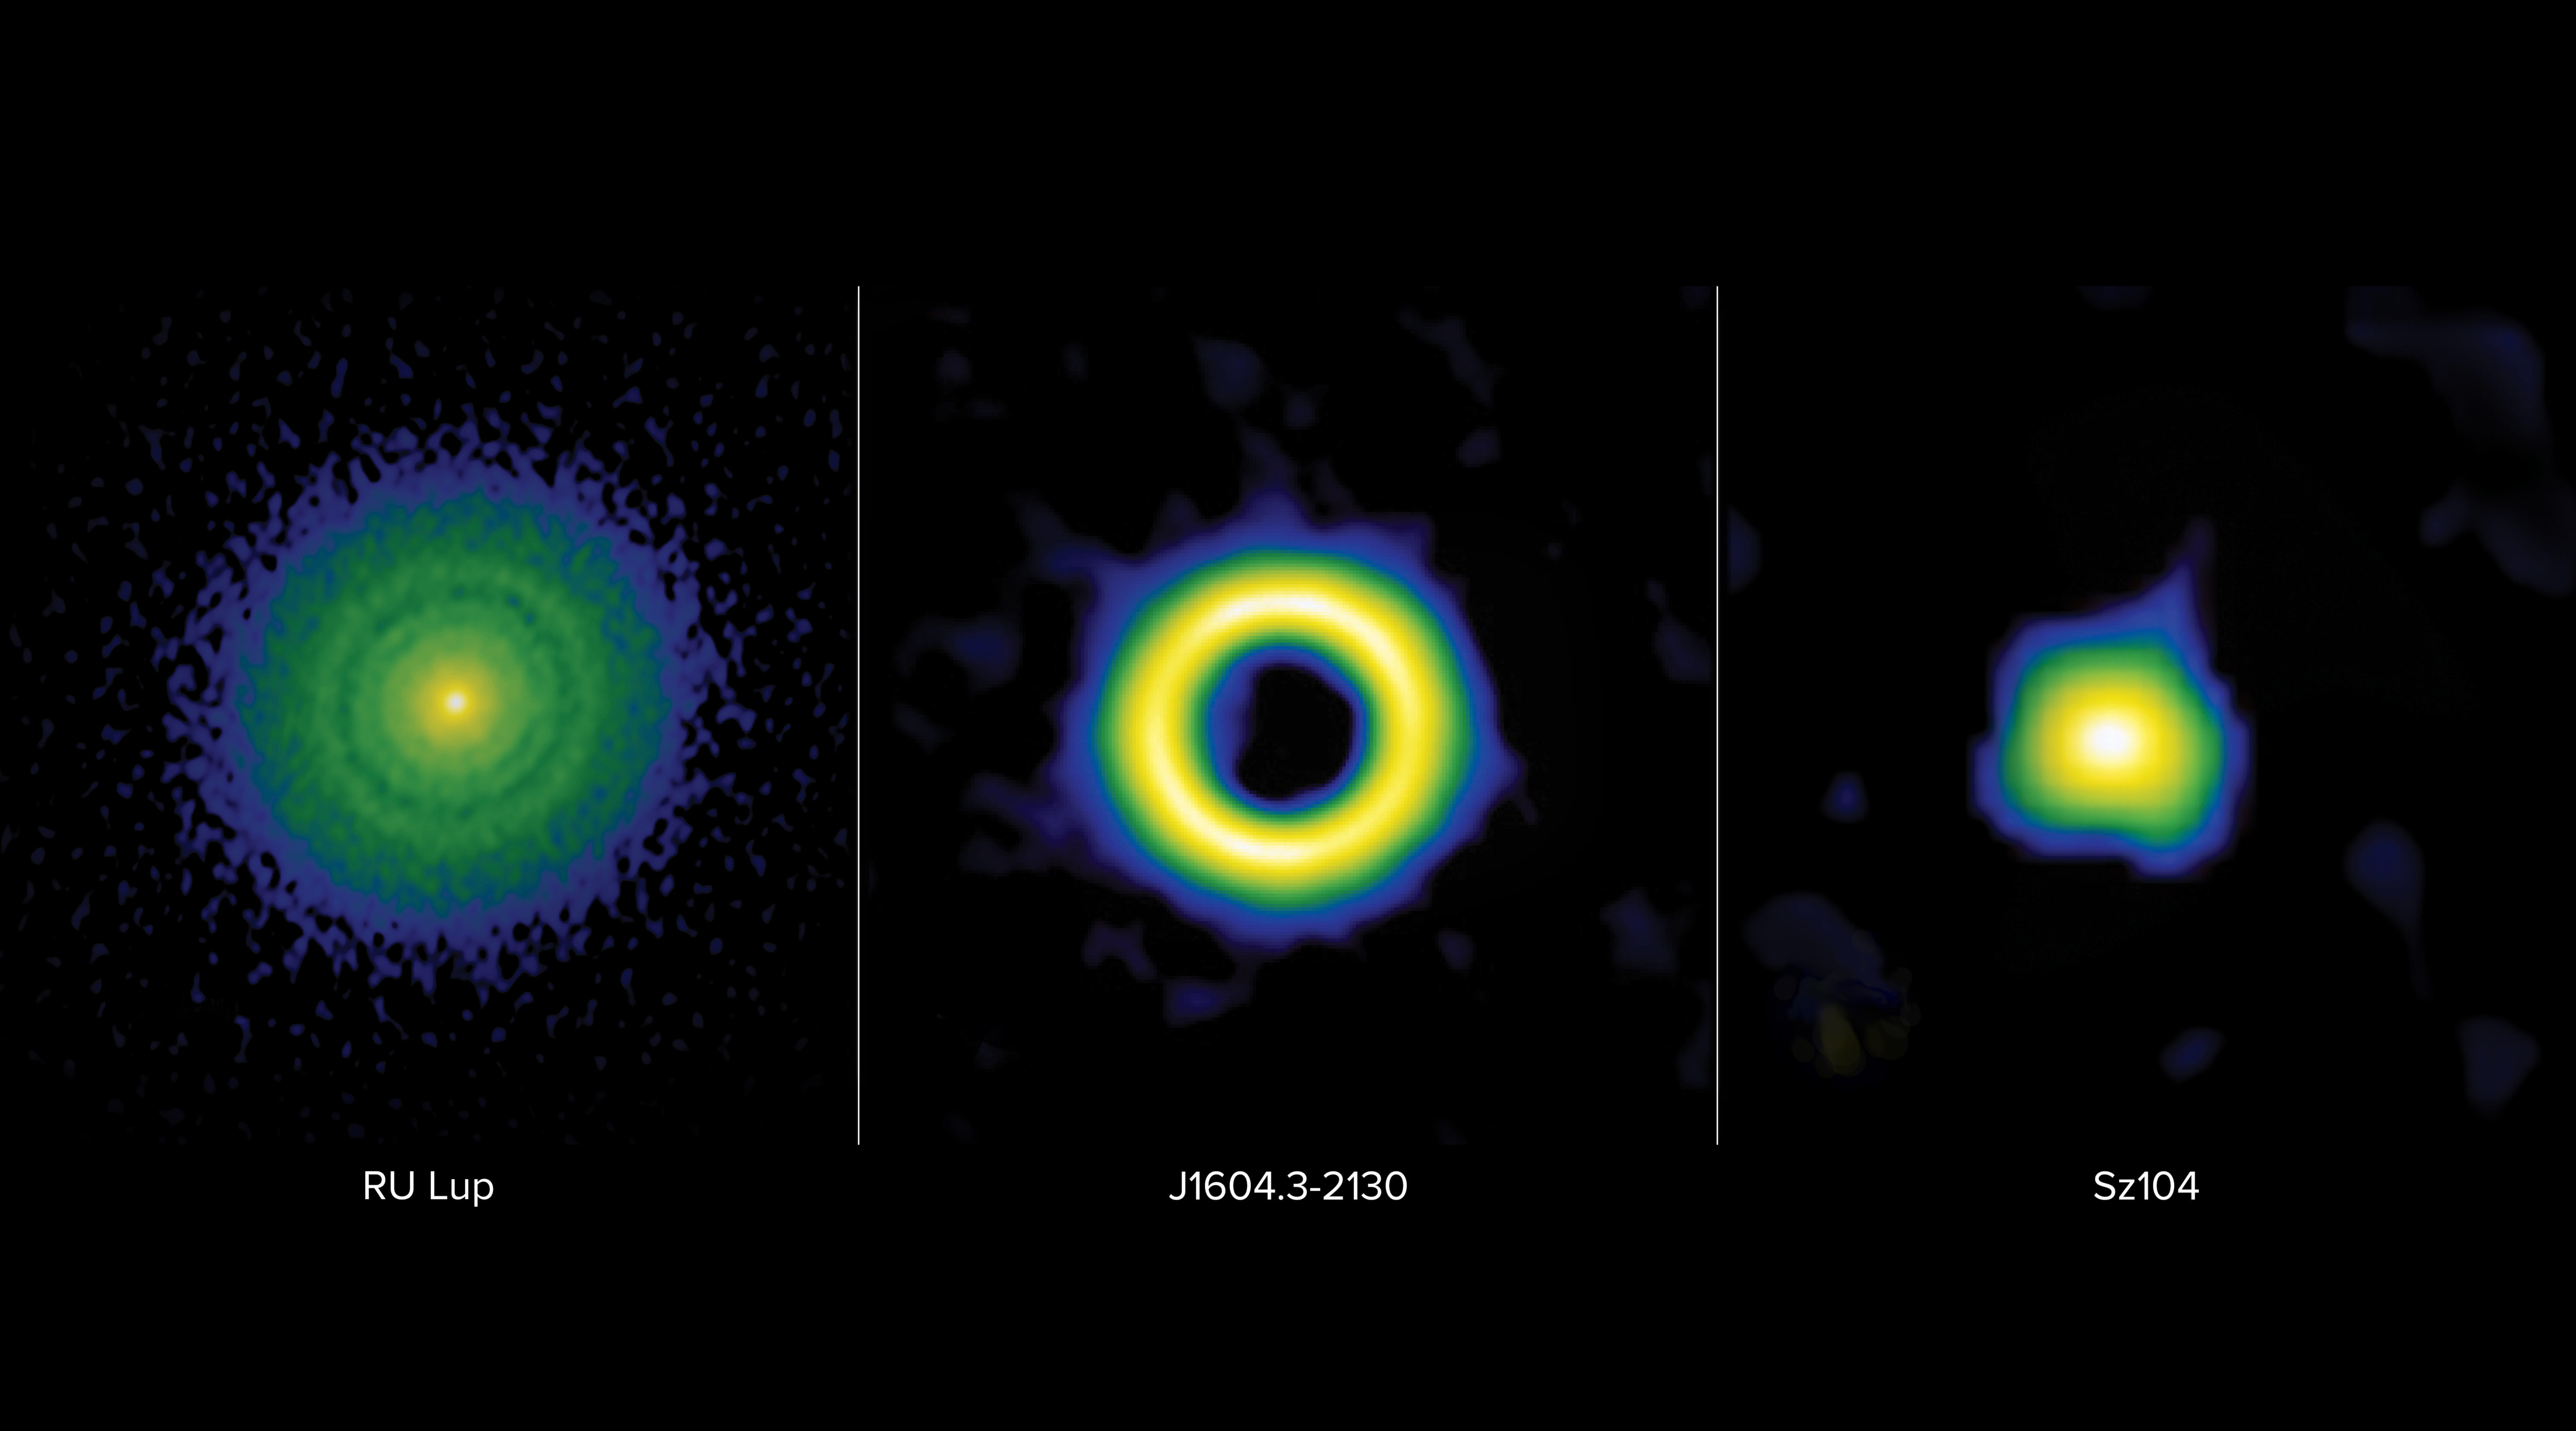 Protoplanetary disks are classified into three main categories: transition, ring, or extended. These false-color images from the Atacama Large Millimeter/submillimeter Array (ALMA) show these classifications in stark contrast. On left: the ring disk of RU Lup is characterized by narrow gaps thought to be carved by giant planets with masses ranging between a Neptune mass and a Jupiter mass. Middle: the transition disk of J1604.3-2130 is characterized by a large inner cavity thought to be carved by planets more massive than Jupiter, also known as Super-Jovian planets. On right: the compact disk of Sz104 is believed not to contain giant planets, as it lacks the telltale gaps and cavities associated with the presence of giant planets. Credit: ALMA (ESO/NAOJ/NRAO), S. Dagnello (NRAO)